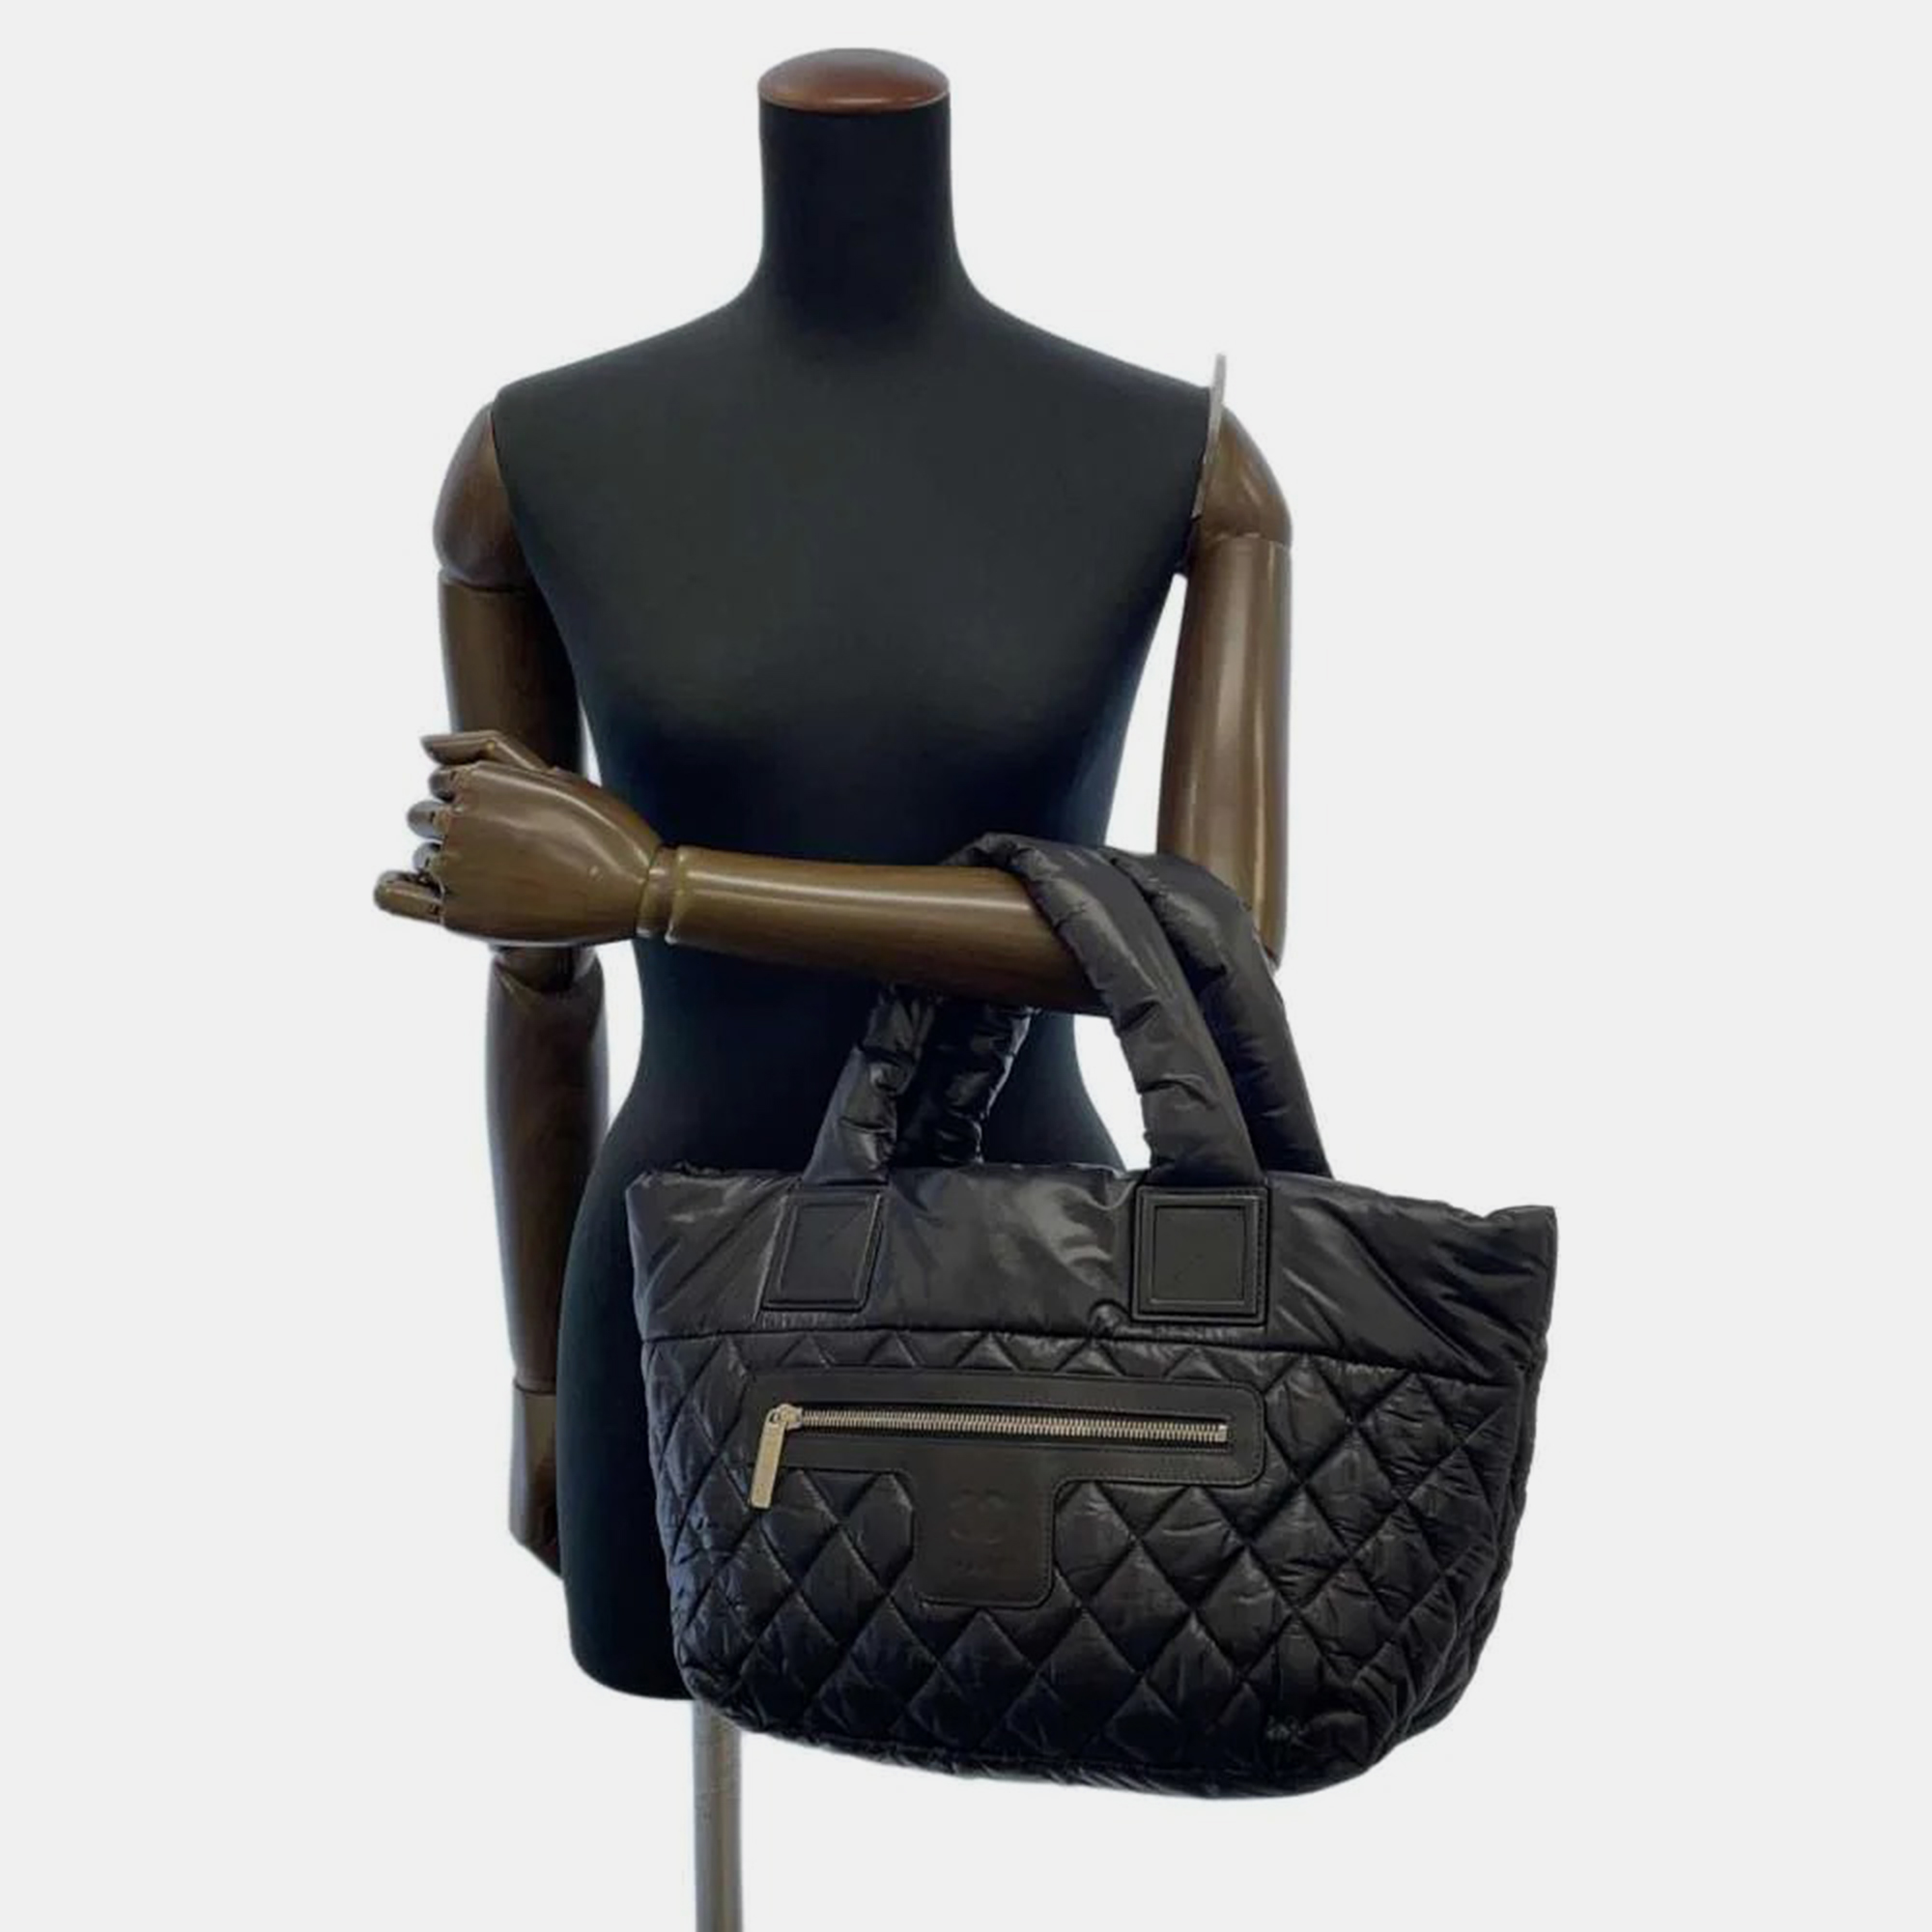 

Chanel Black Leather Coco Cocoon Bag